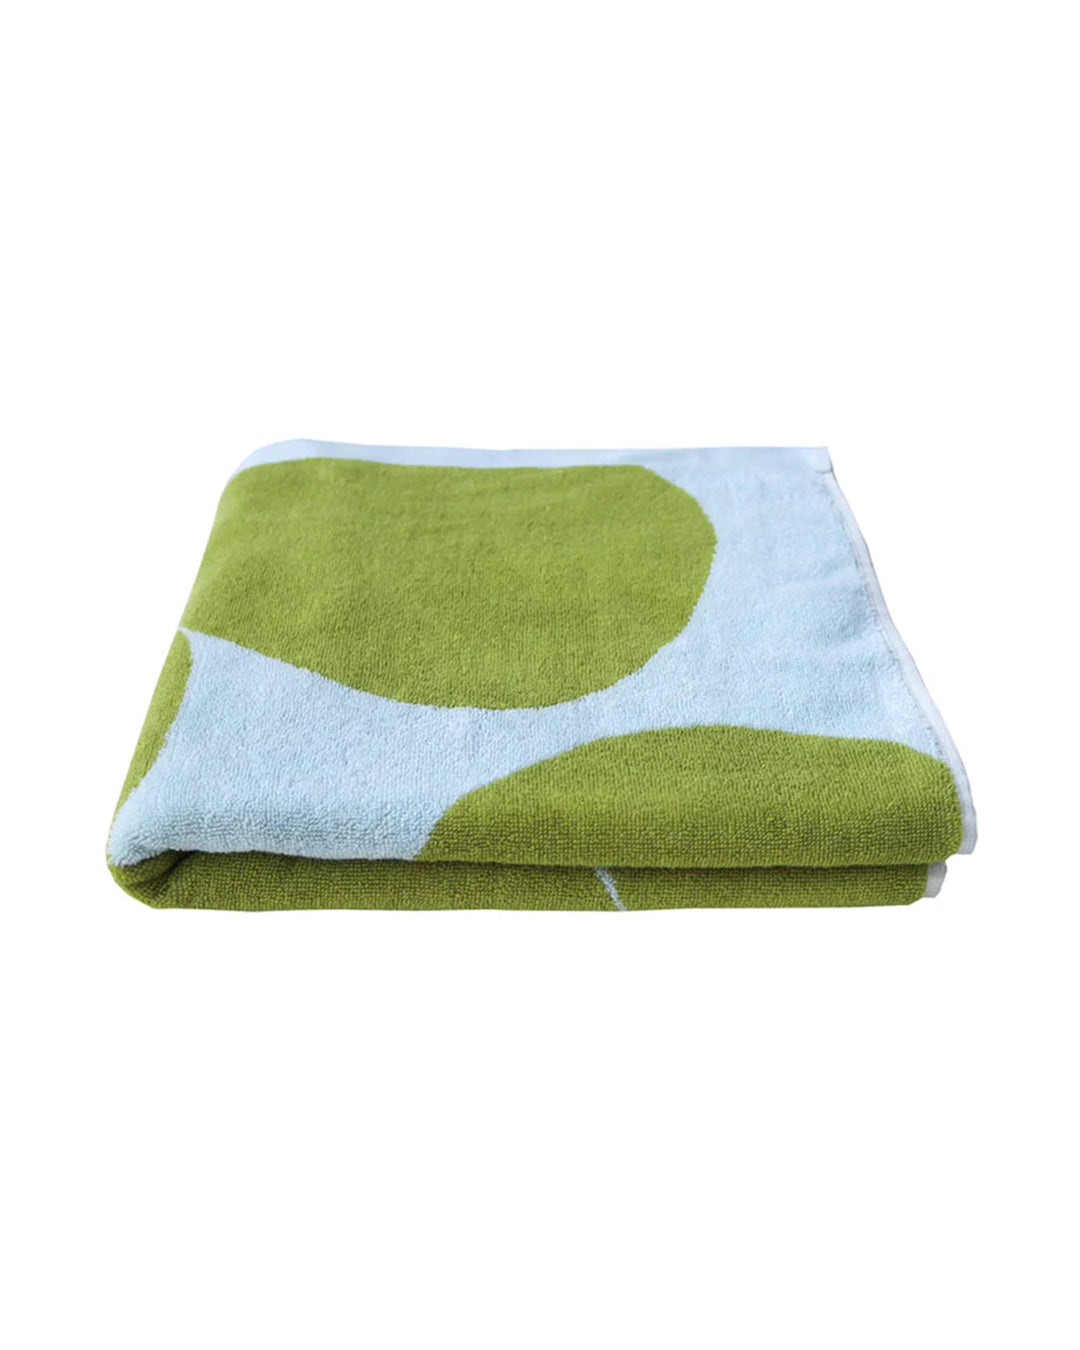 Inspired by nature's pebbles, this bold print in green and aqua tones brings the outside in, creating a soothing palette that layers effortlessly in any children's bathroom. Designed for a luxurious wrap, this ultra-plush towel is made from 100% organic cotton for the dreamiest feel against your kids' delicate skin.